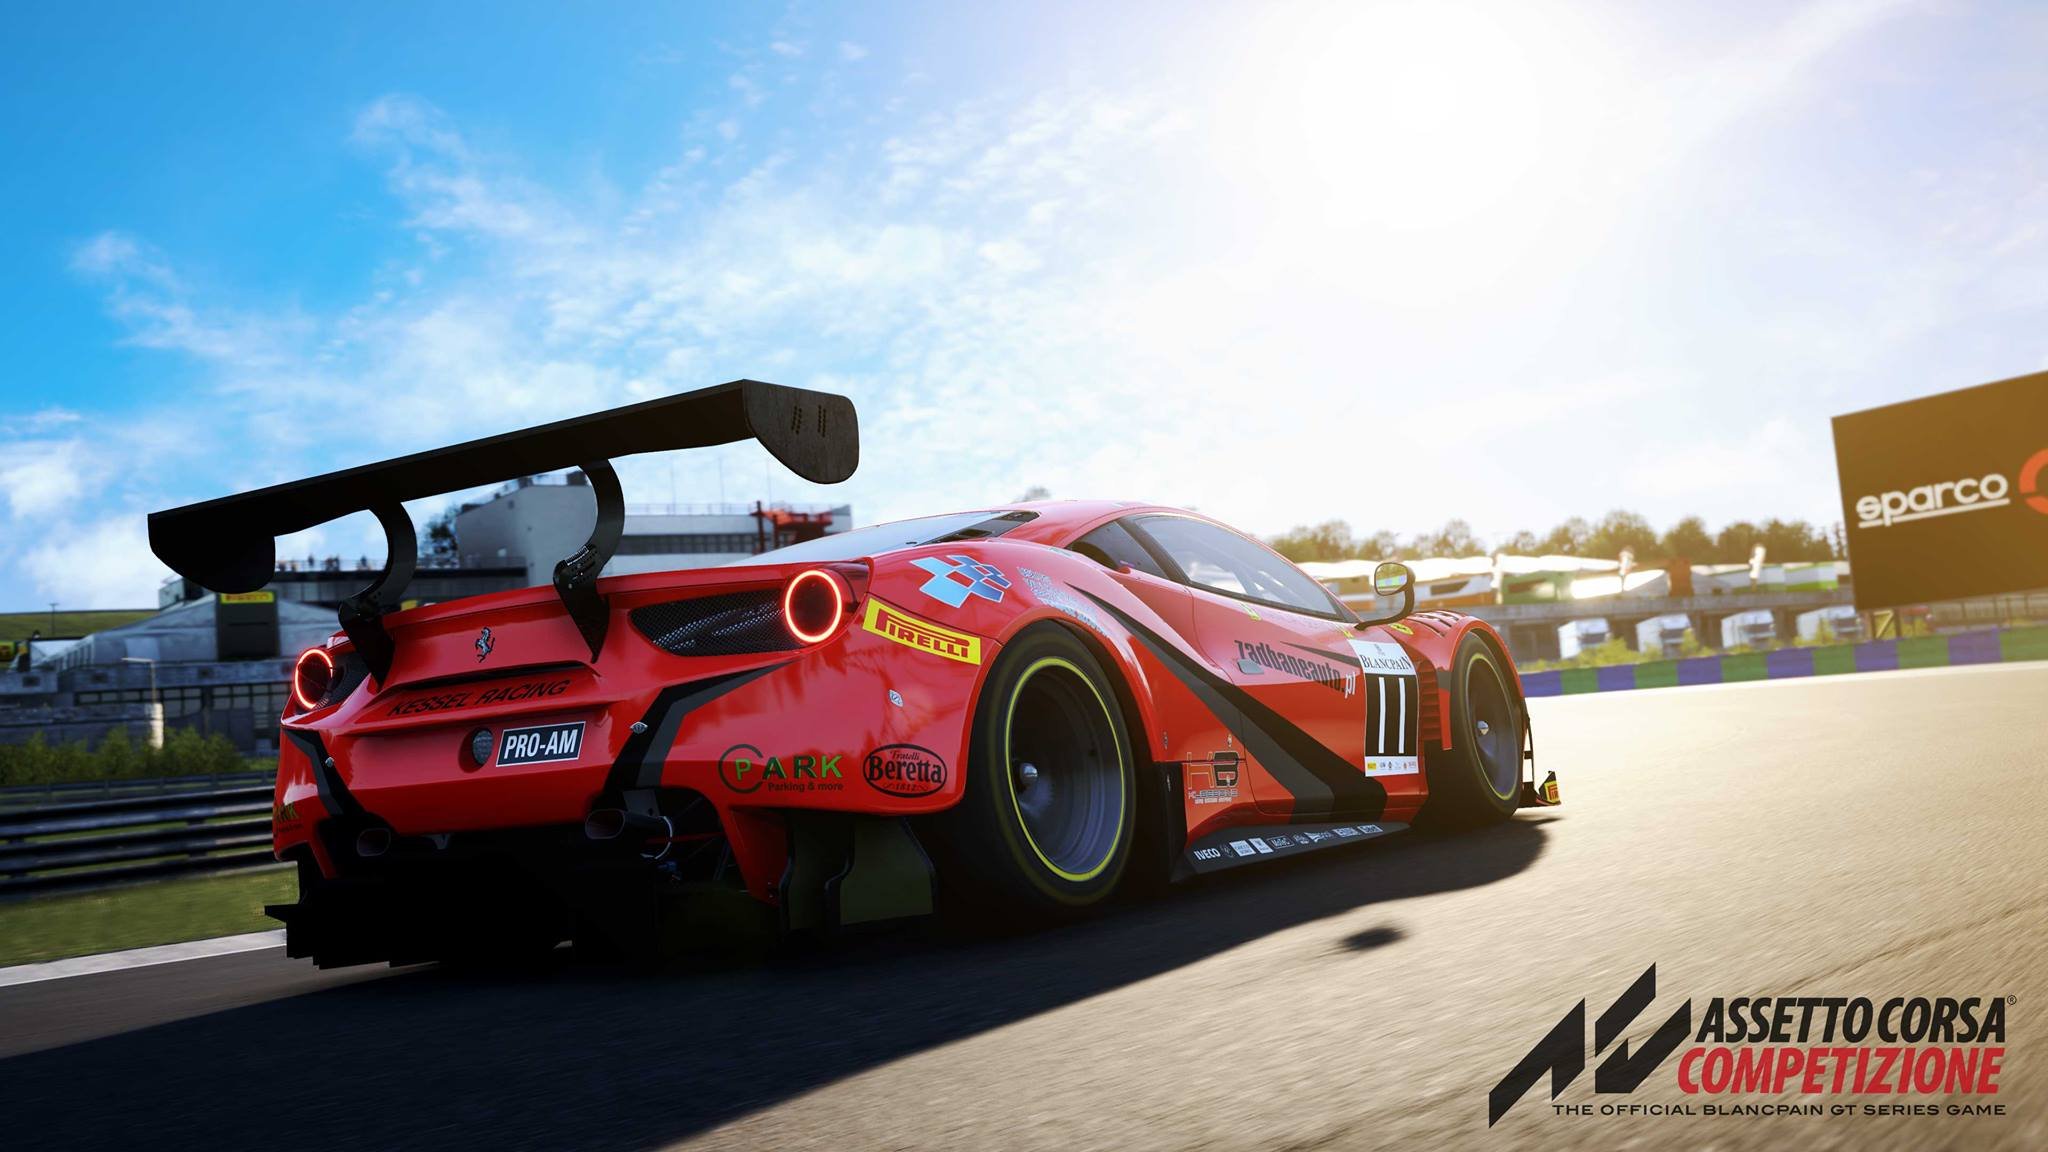 More information about "Assetto Corsa Competizione Steam Early Access Release 4"